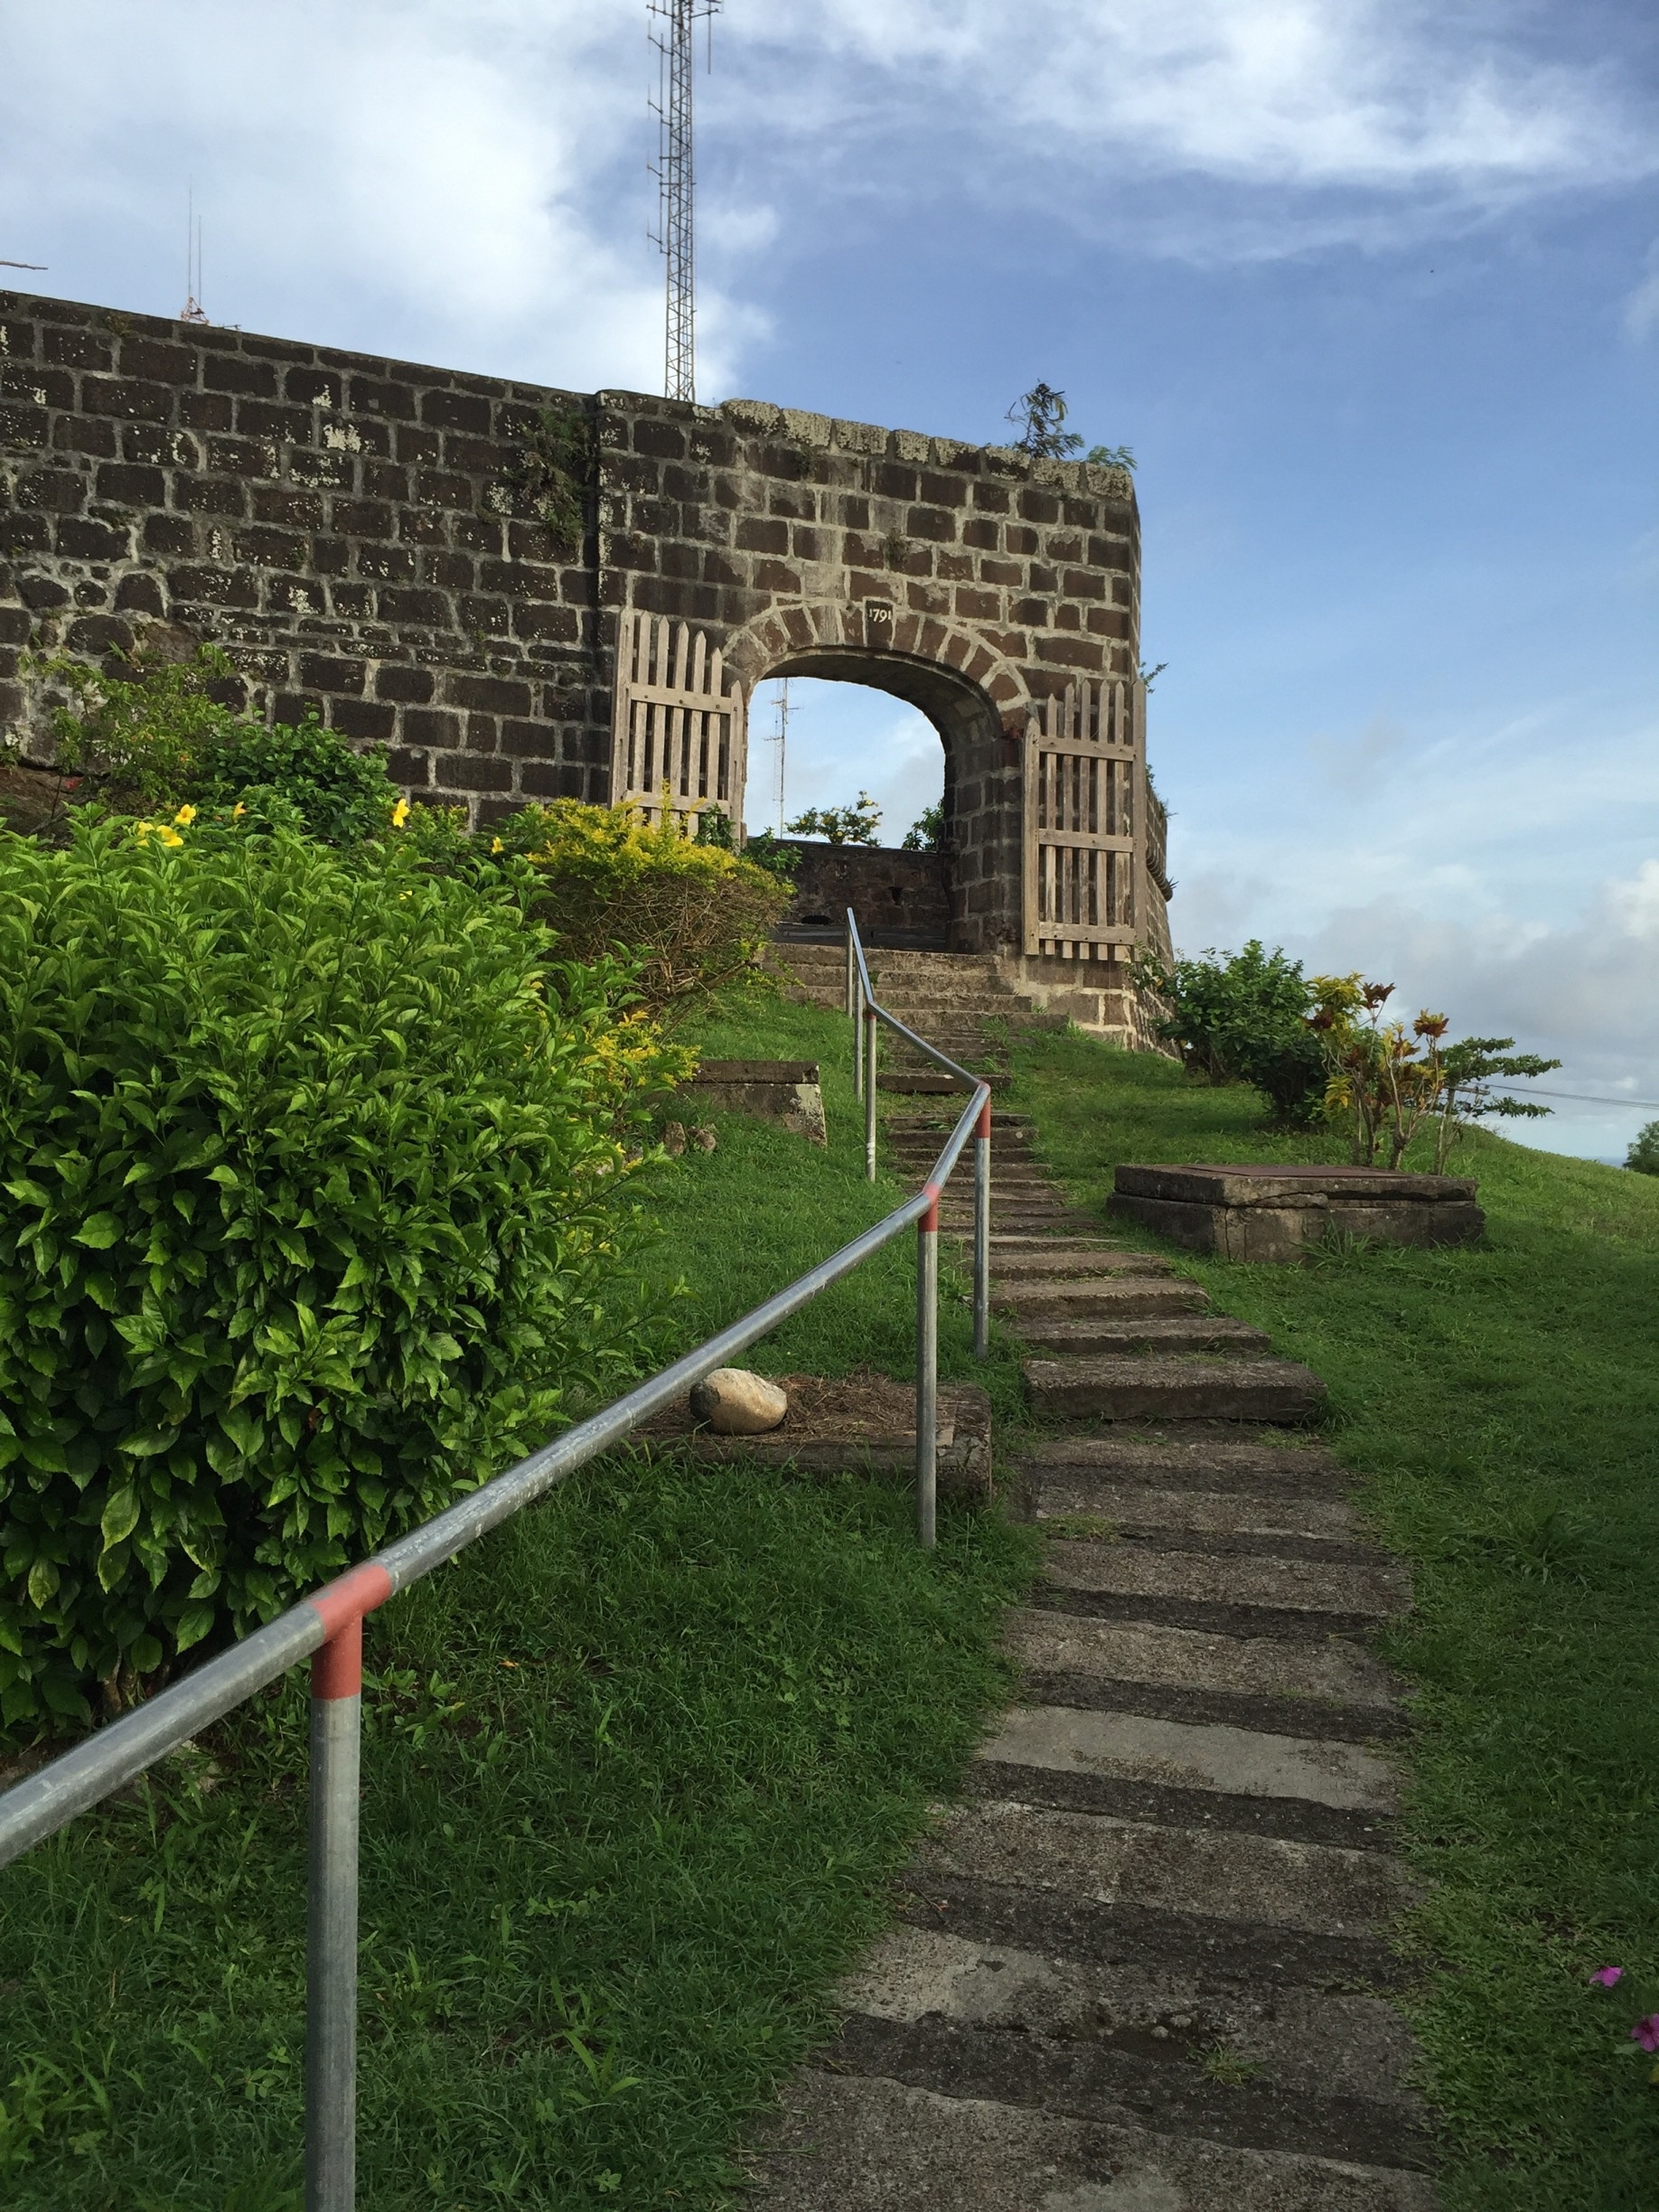 Grenada takes pride in Fort Frederick's status as one of the few forts in the world that has 'never fired a shot in anger'. Curious turn of phrase. It's one of the best spots on the island to get a full view of the capital, St. George's. 